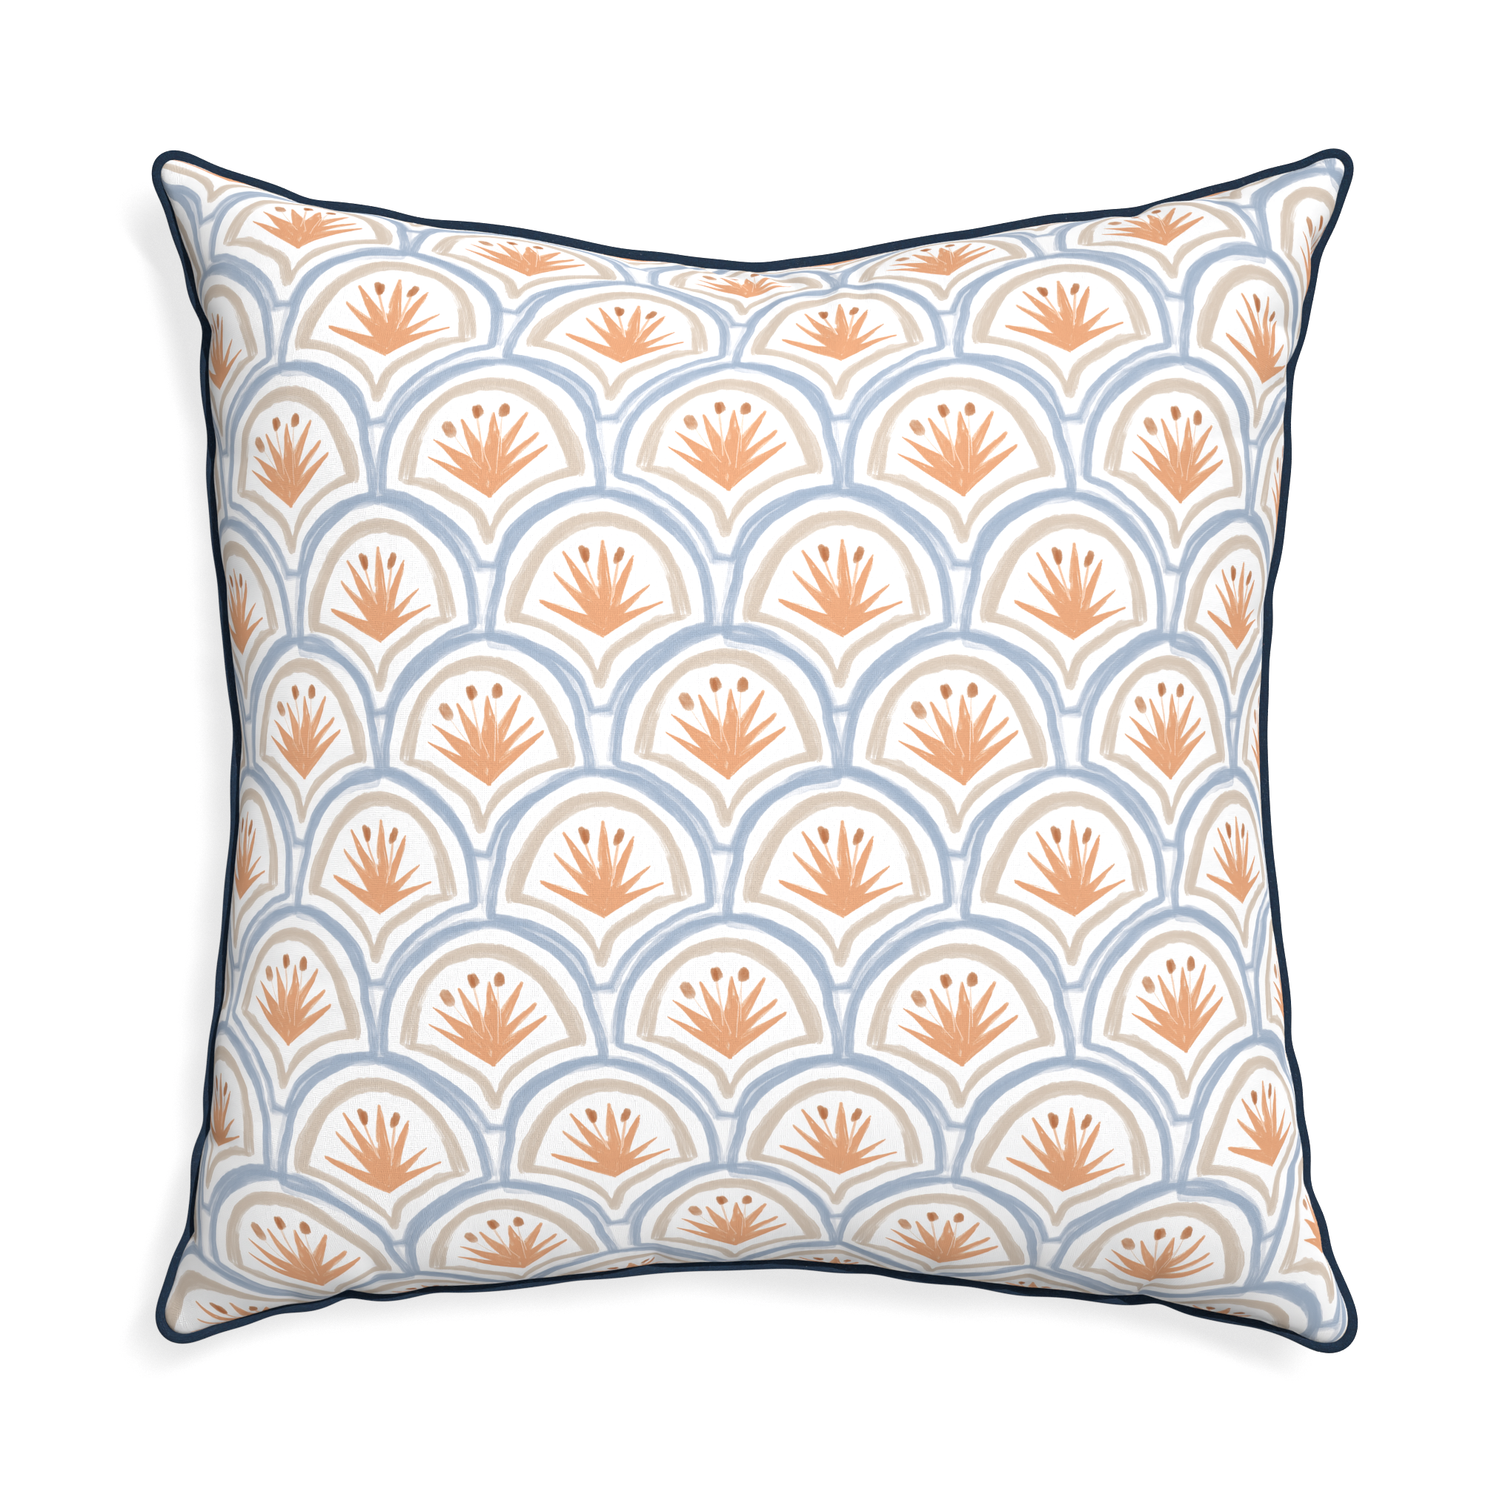 Euro-sham thatcher apricot custom art deco palm patternpillow with c piping on white background